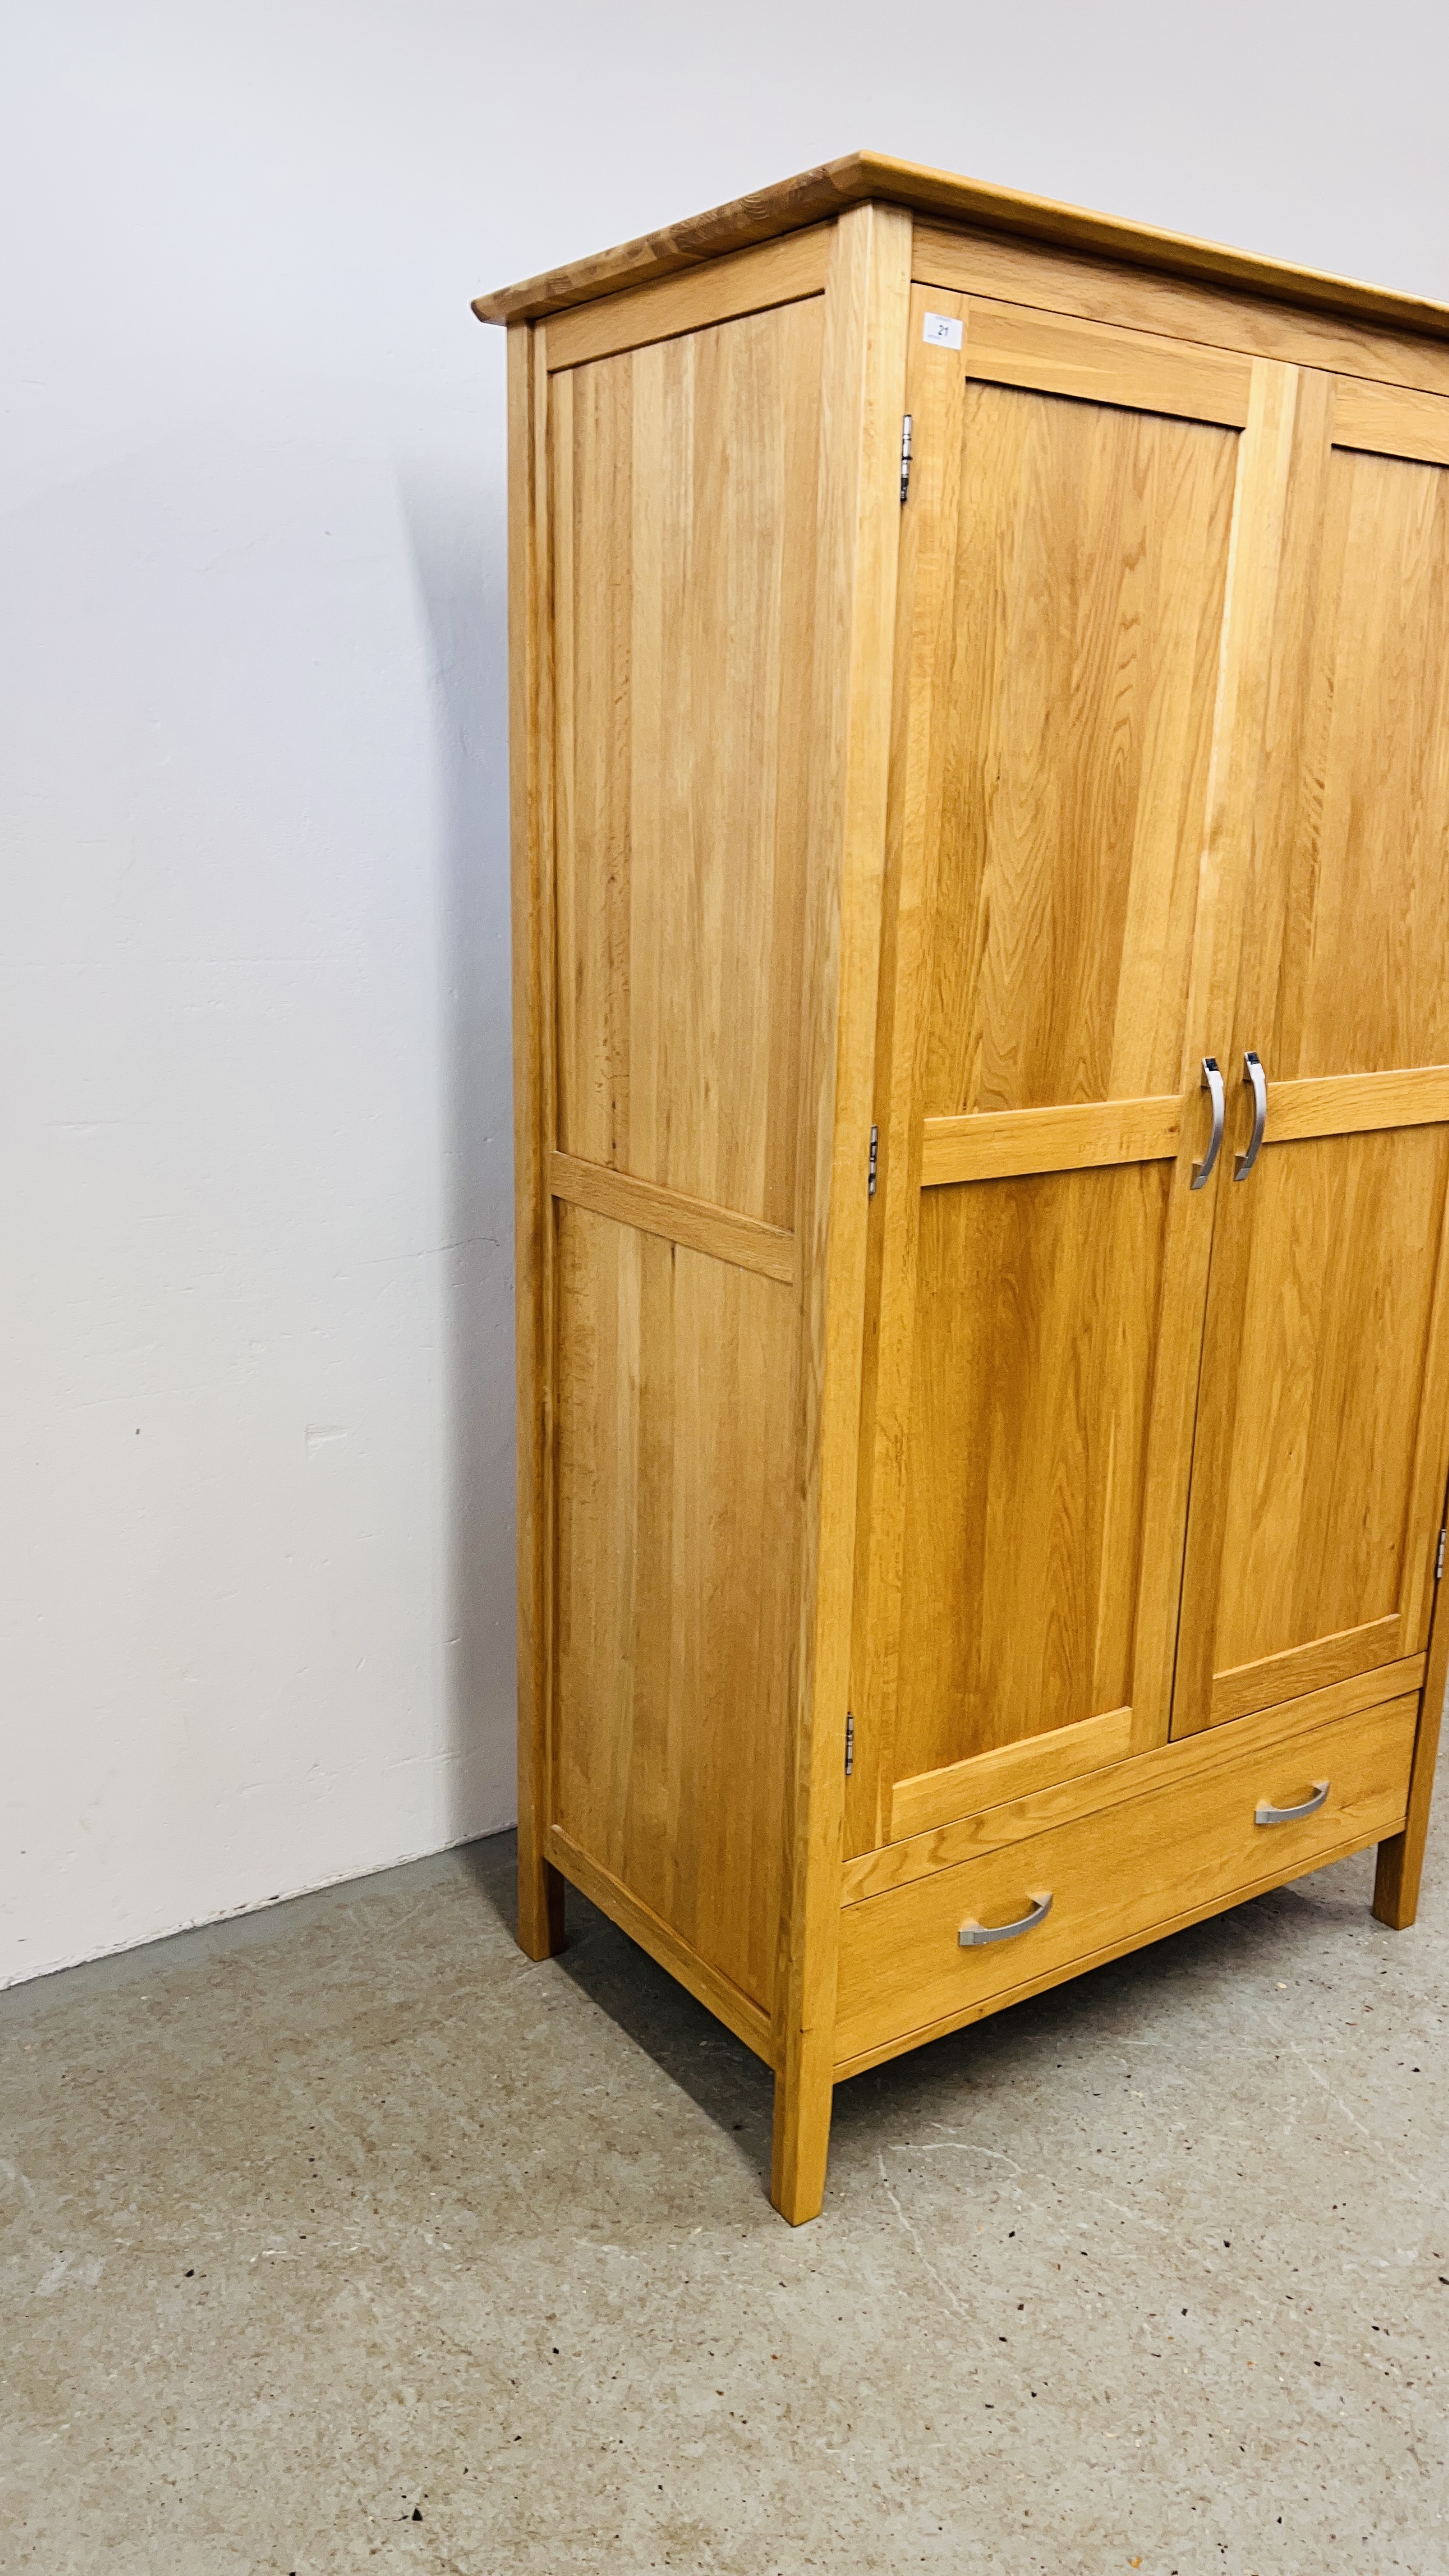 A SOLID LIGHT OAK DOUBLE WARDROBE WITH DRAWER TO BASE, W - 110CM, D - 60CM, H - 191CM. - Image 3 of 8